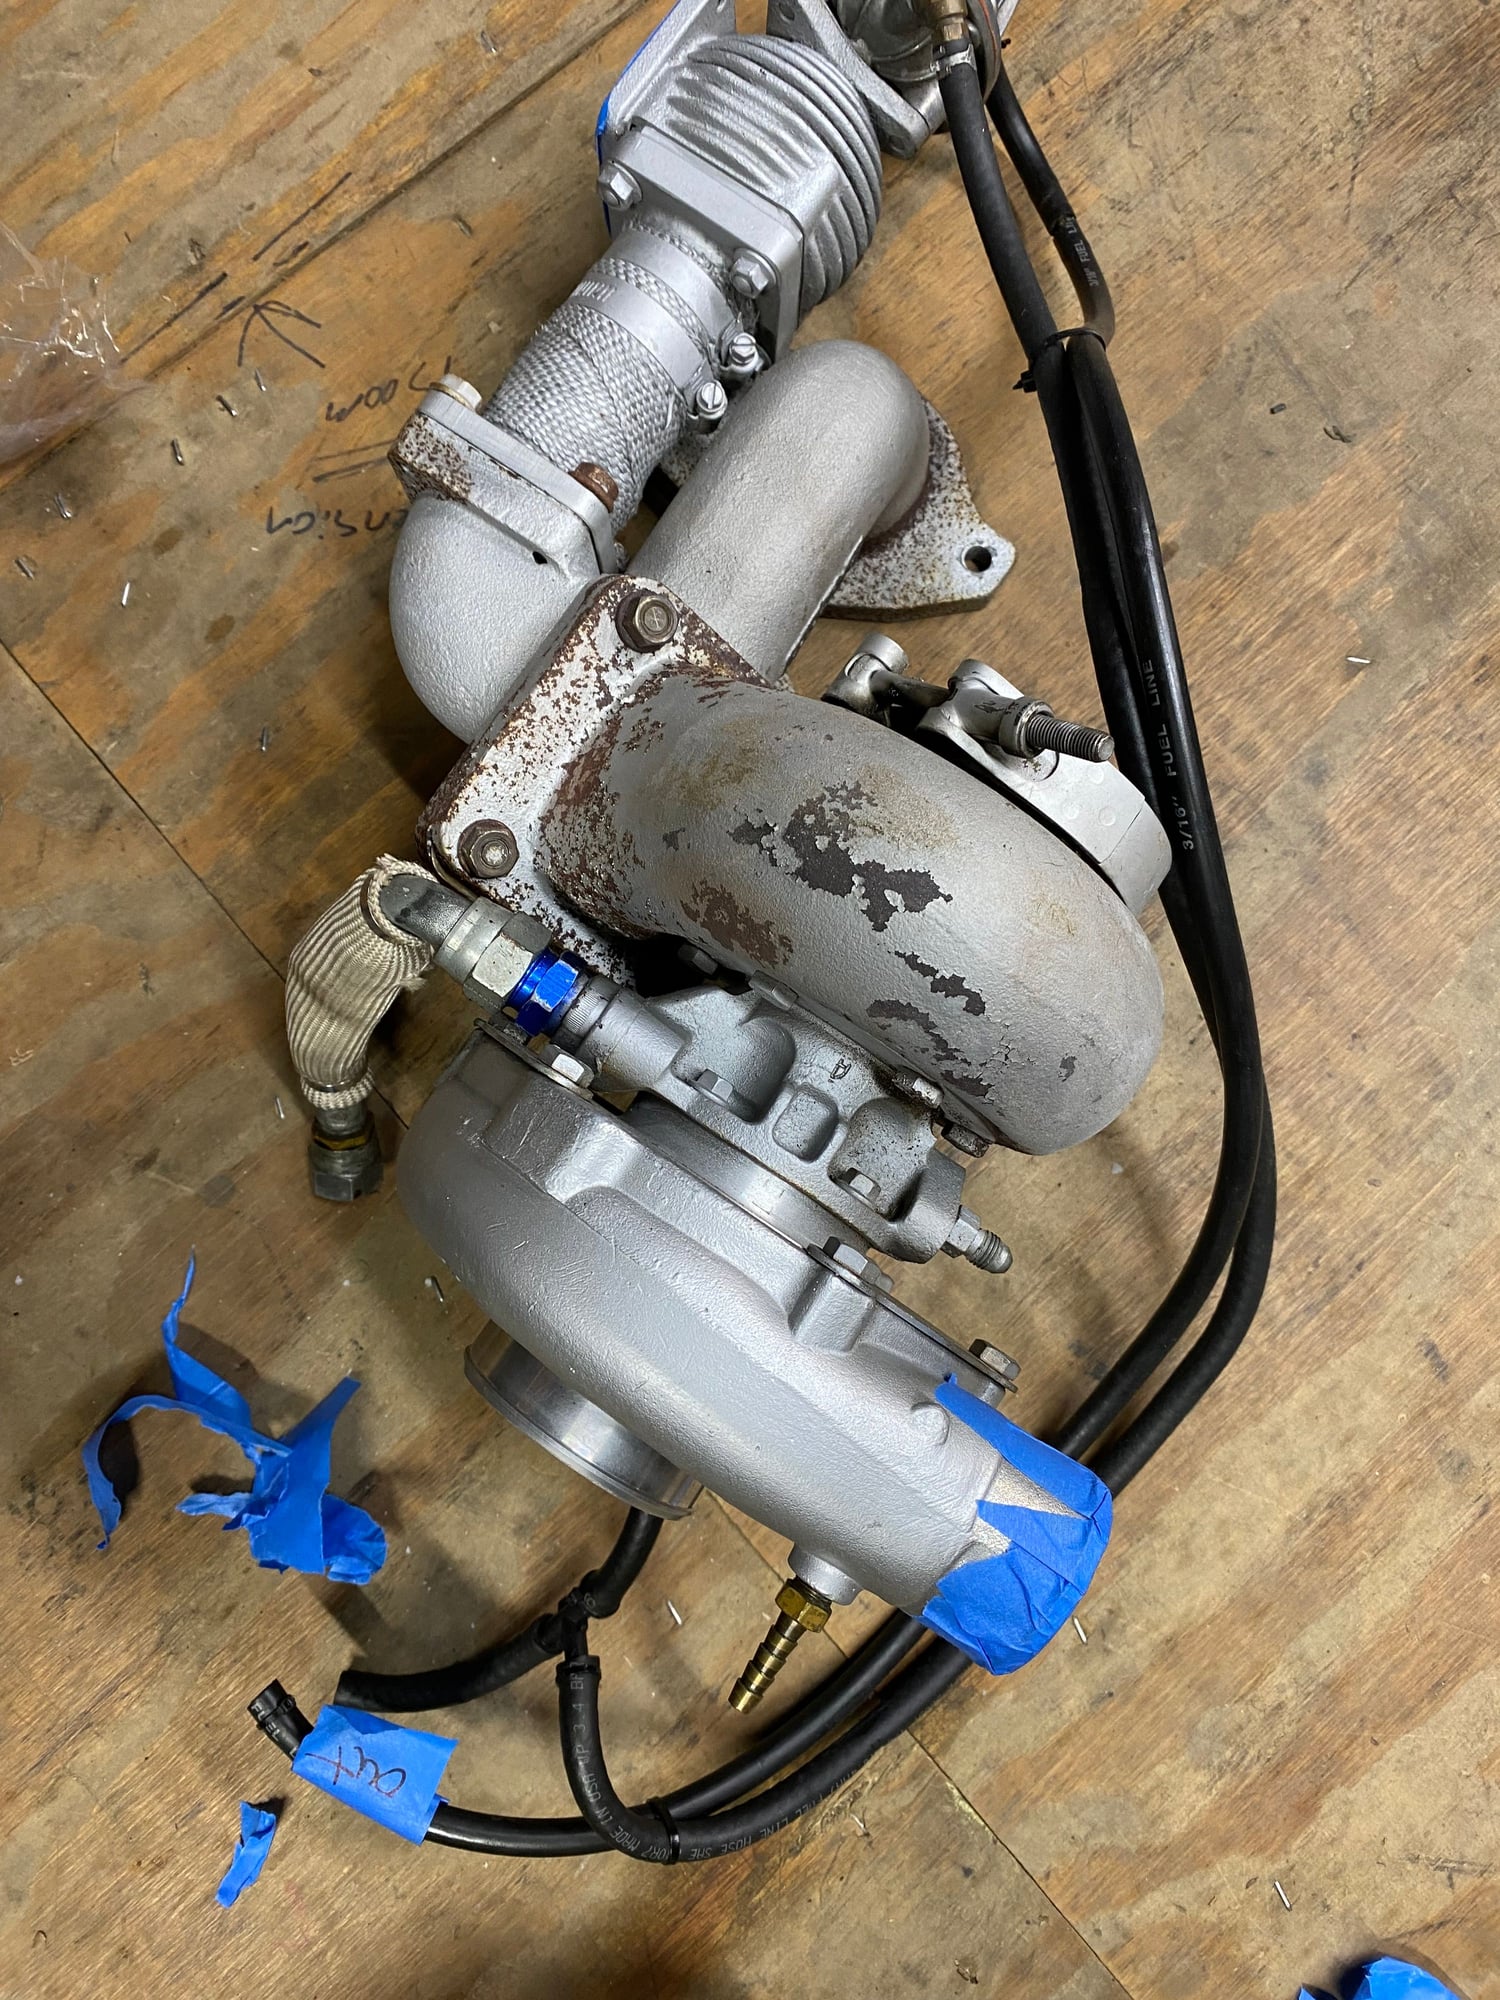 Engine - Power Adders - Comp Turbo with Greedy Wastegate and Greddy Manifold Excellent Condition. - Used - 1987 to 1991 Mazda RX-7 - Prince Frederick, MD 20678, United States